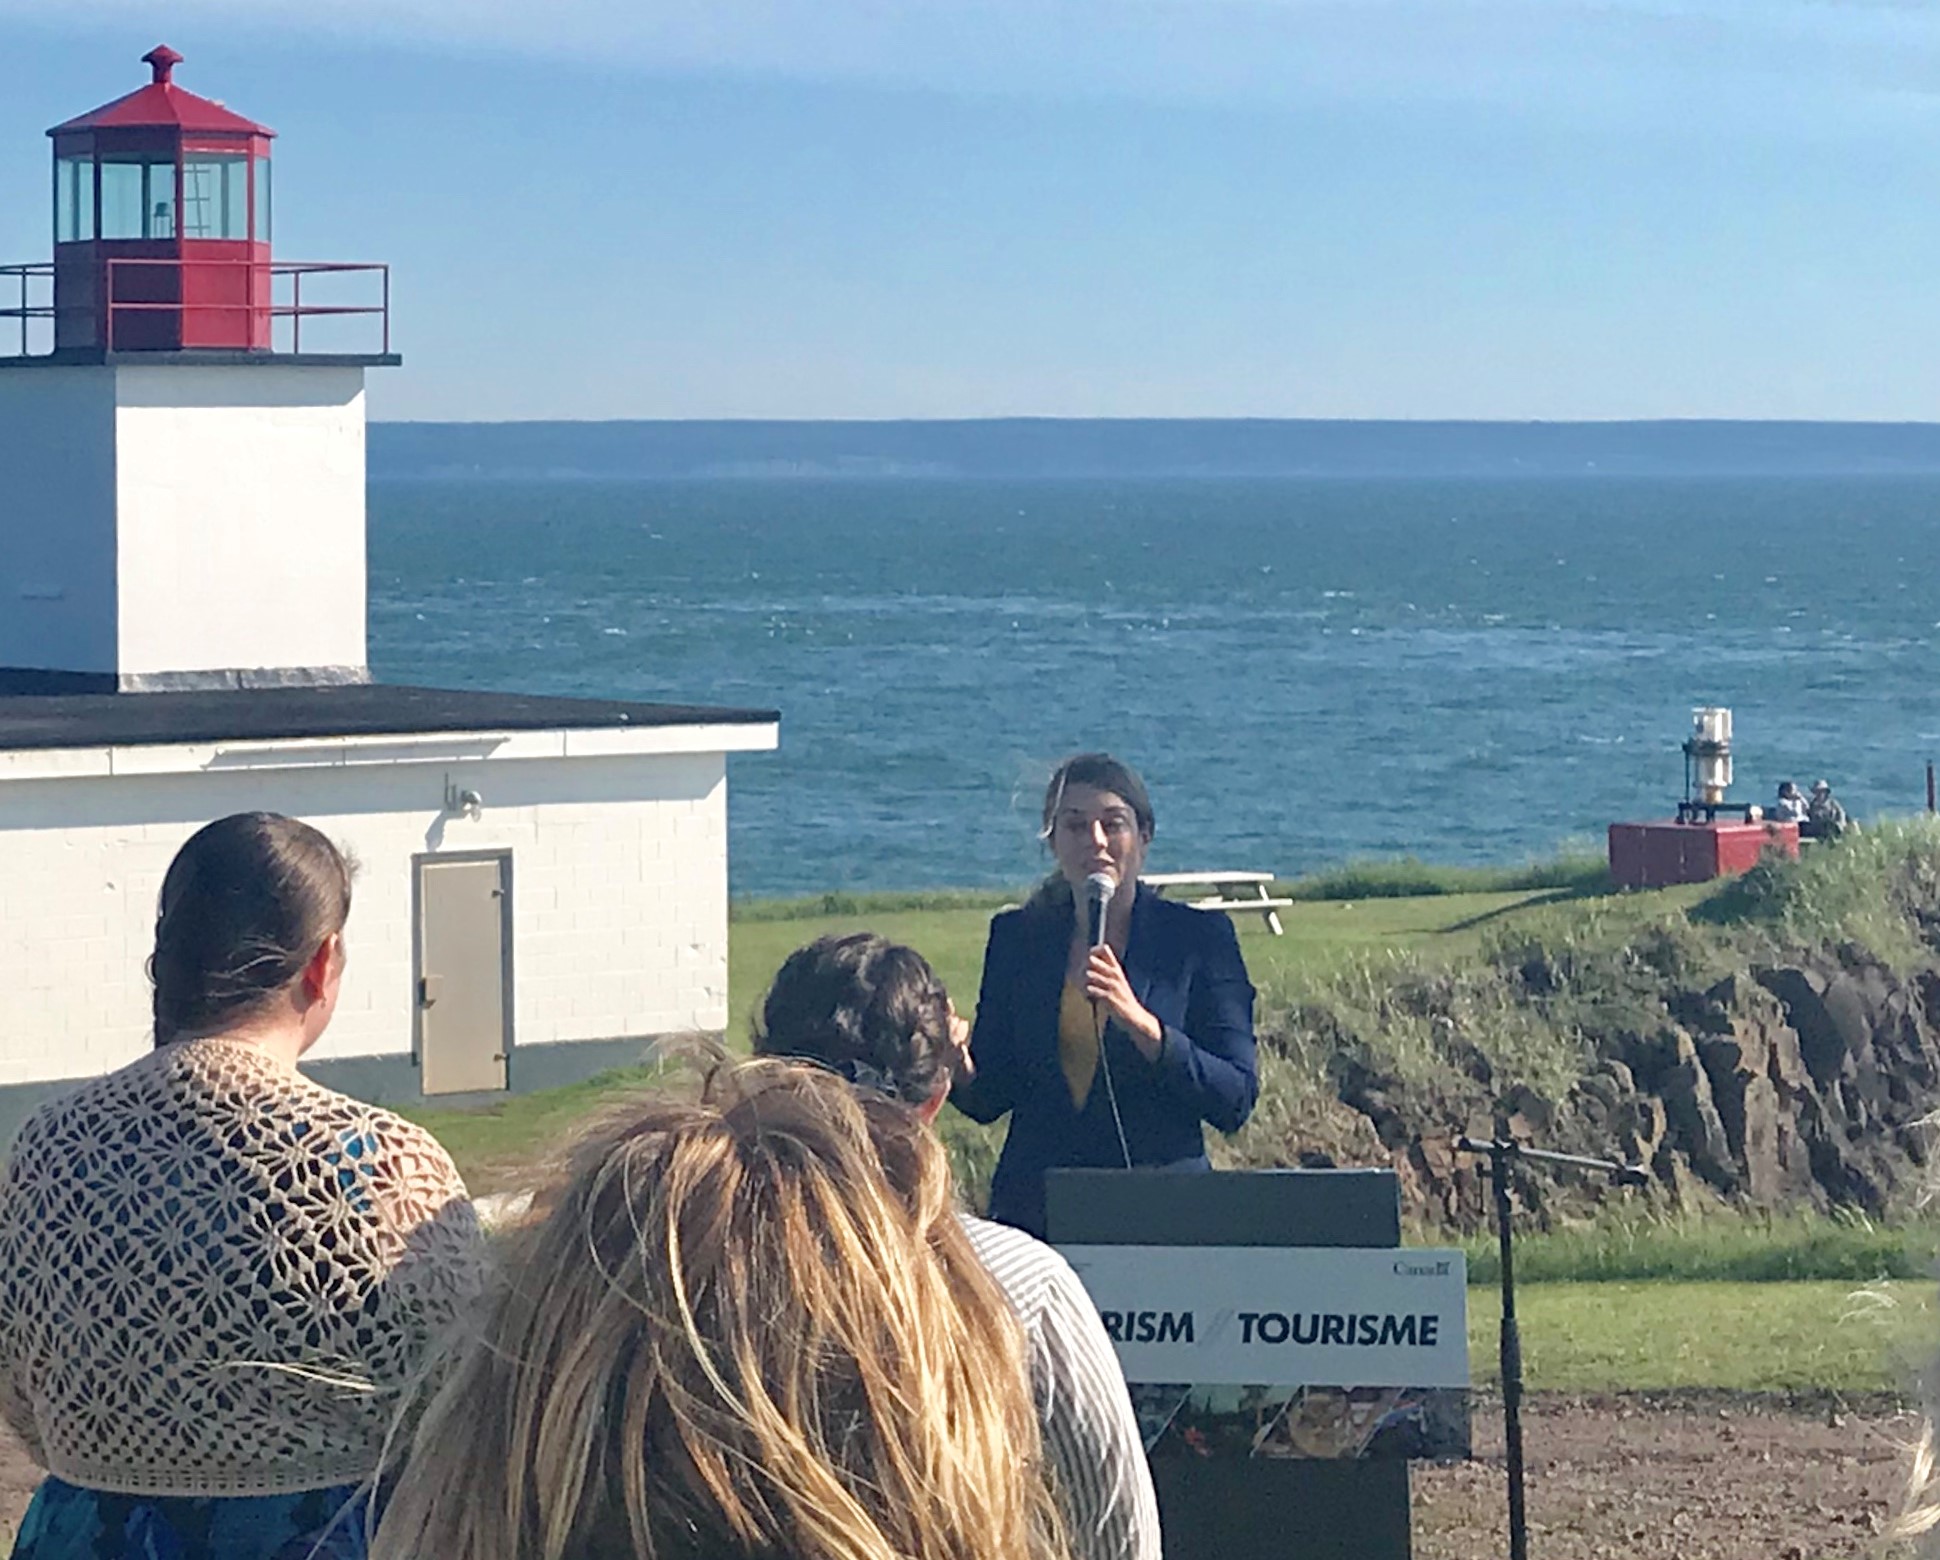 Minister Joly announces infrastructure funding for Cape d'Or, Nova Scotia